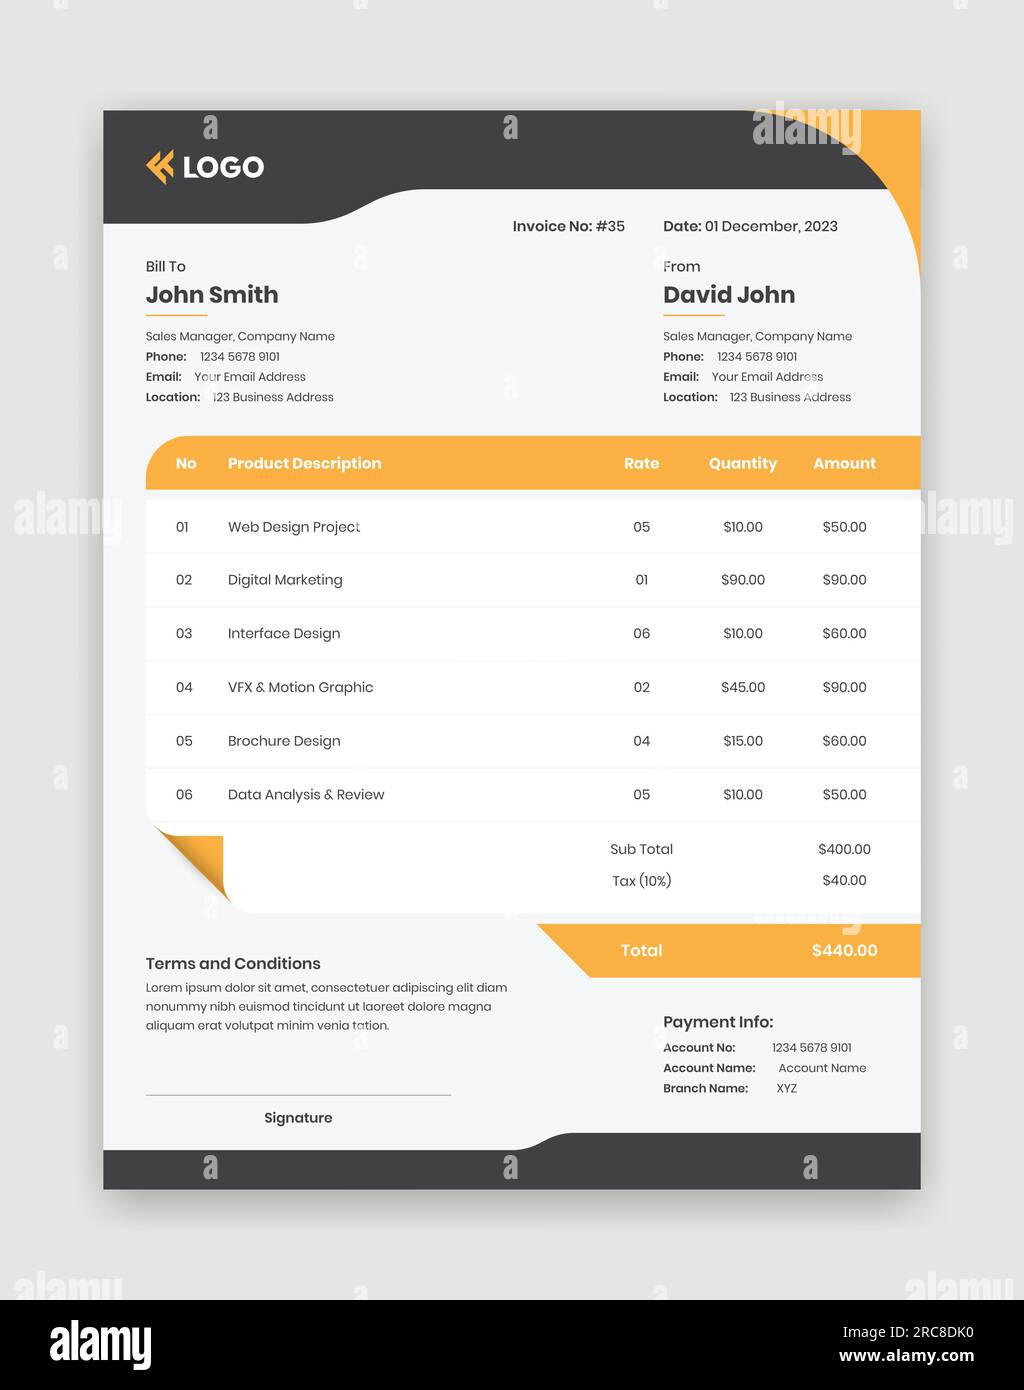 Simple designed bill receipt or invoice template for digital agencies and business Stock Vector